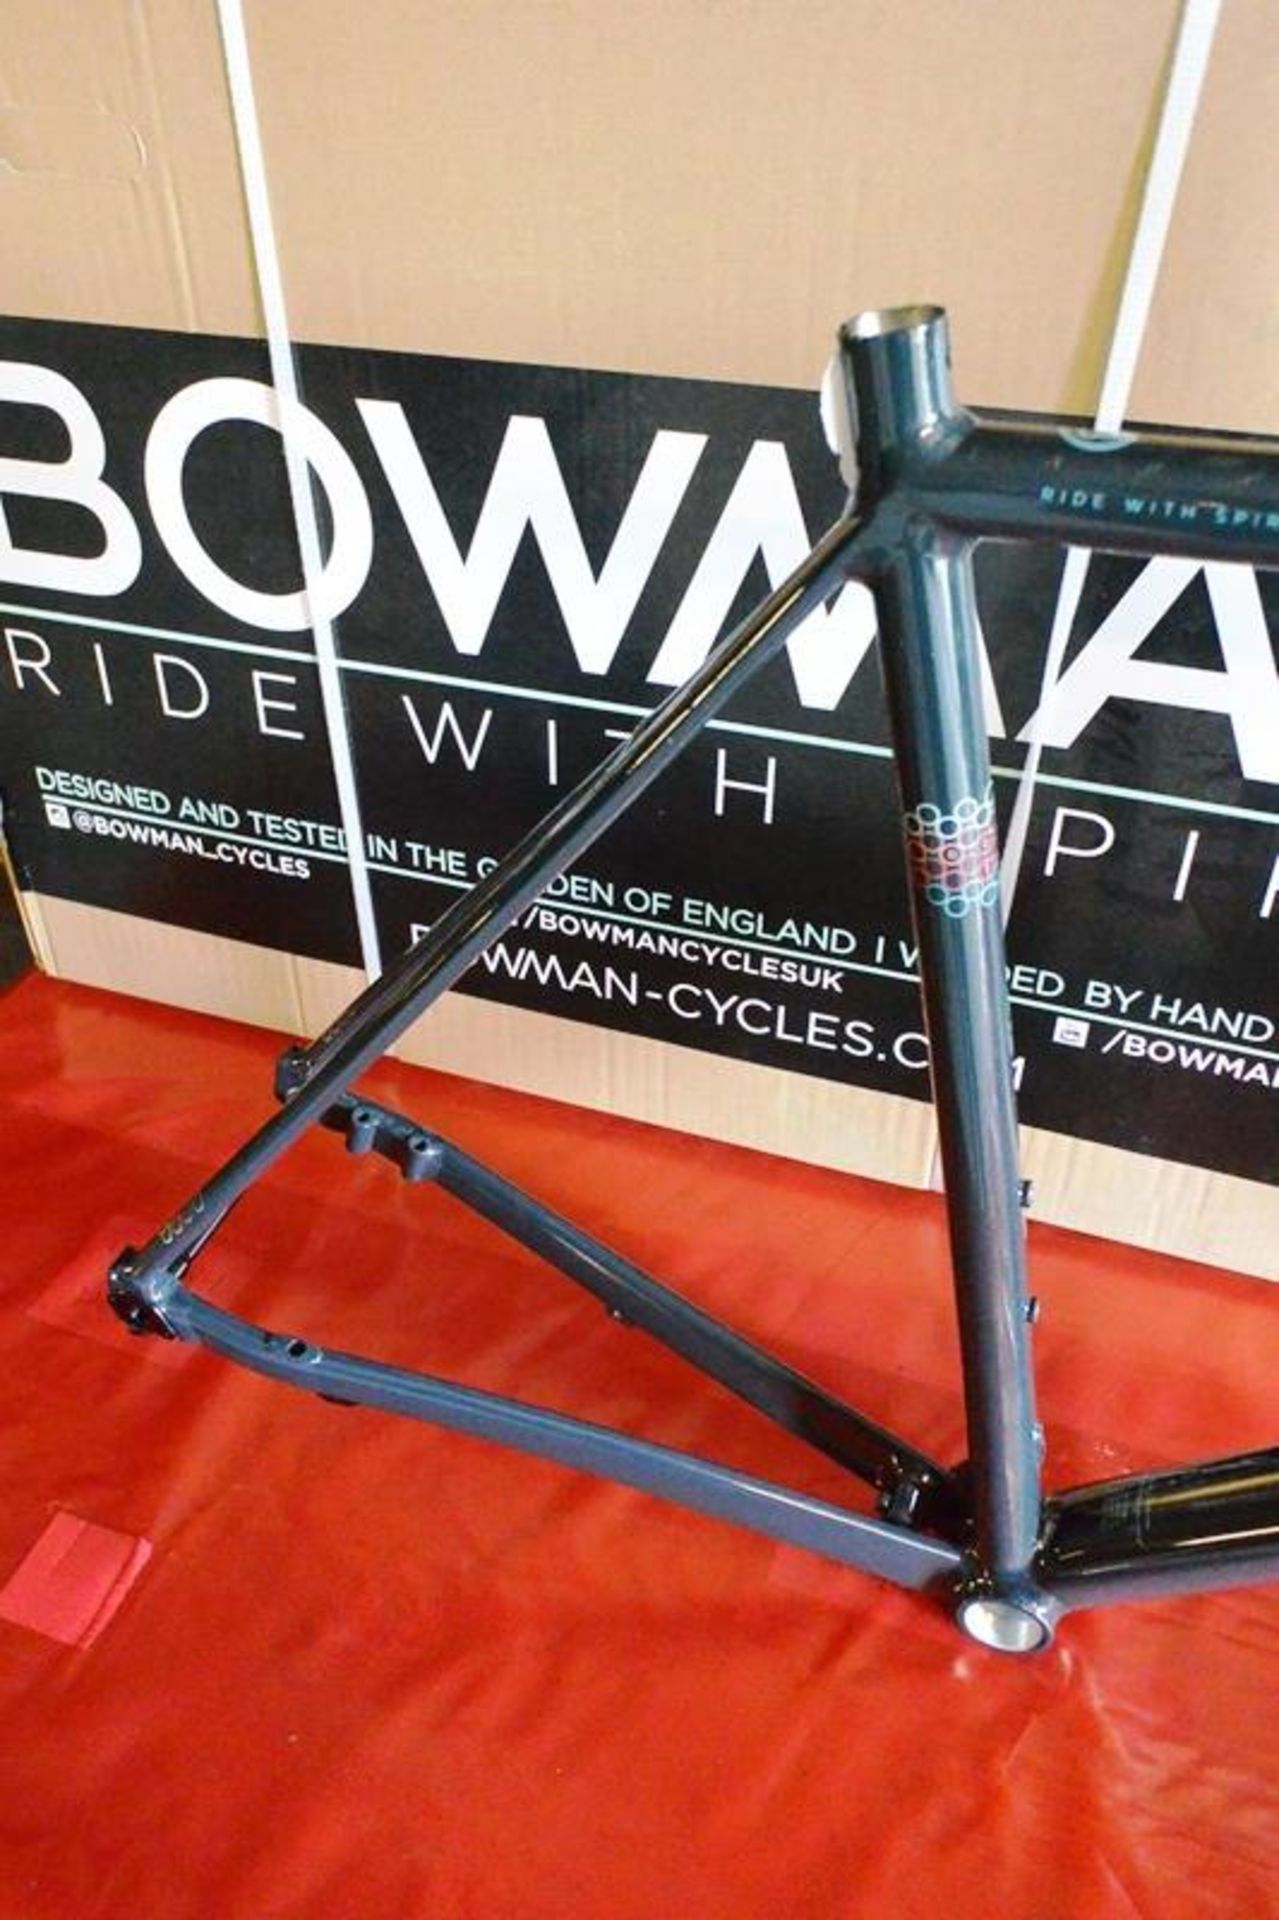 Bowman Weald Frame incl. fork (with original box) - Image 4 of 4